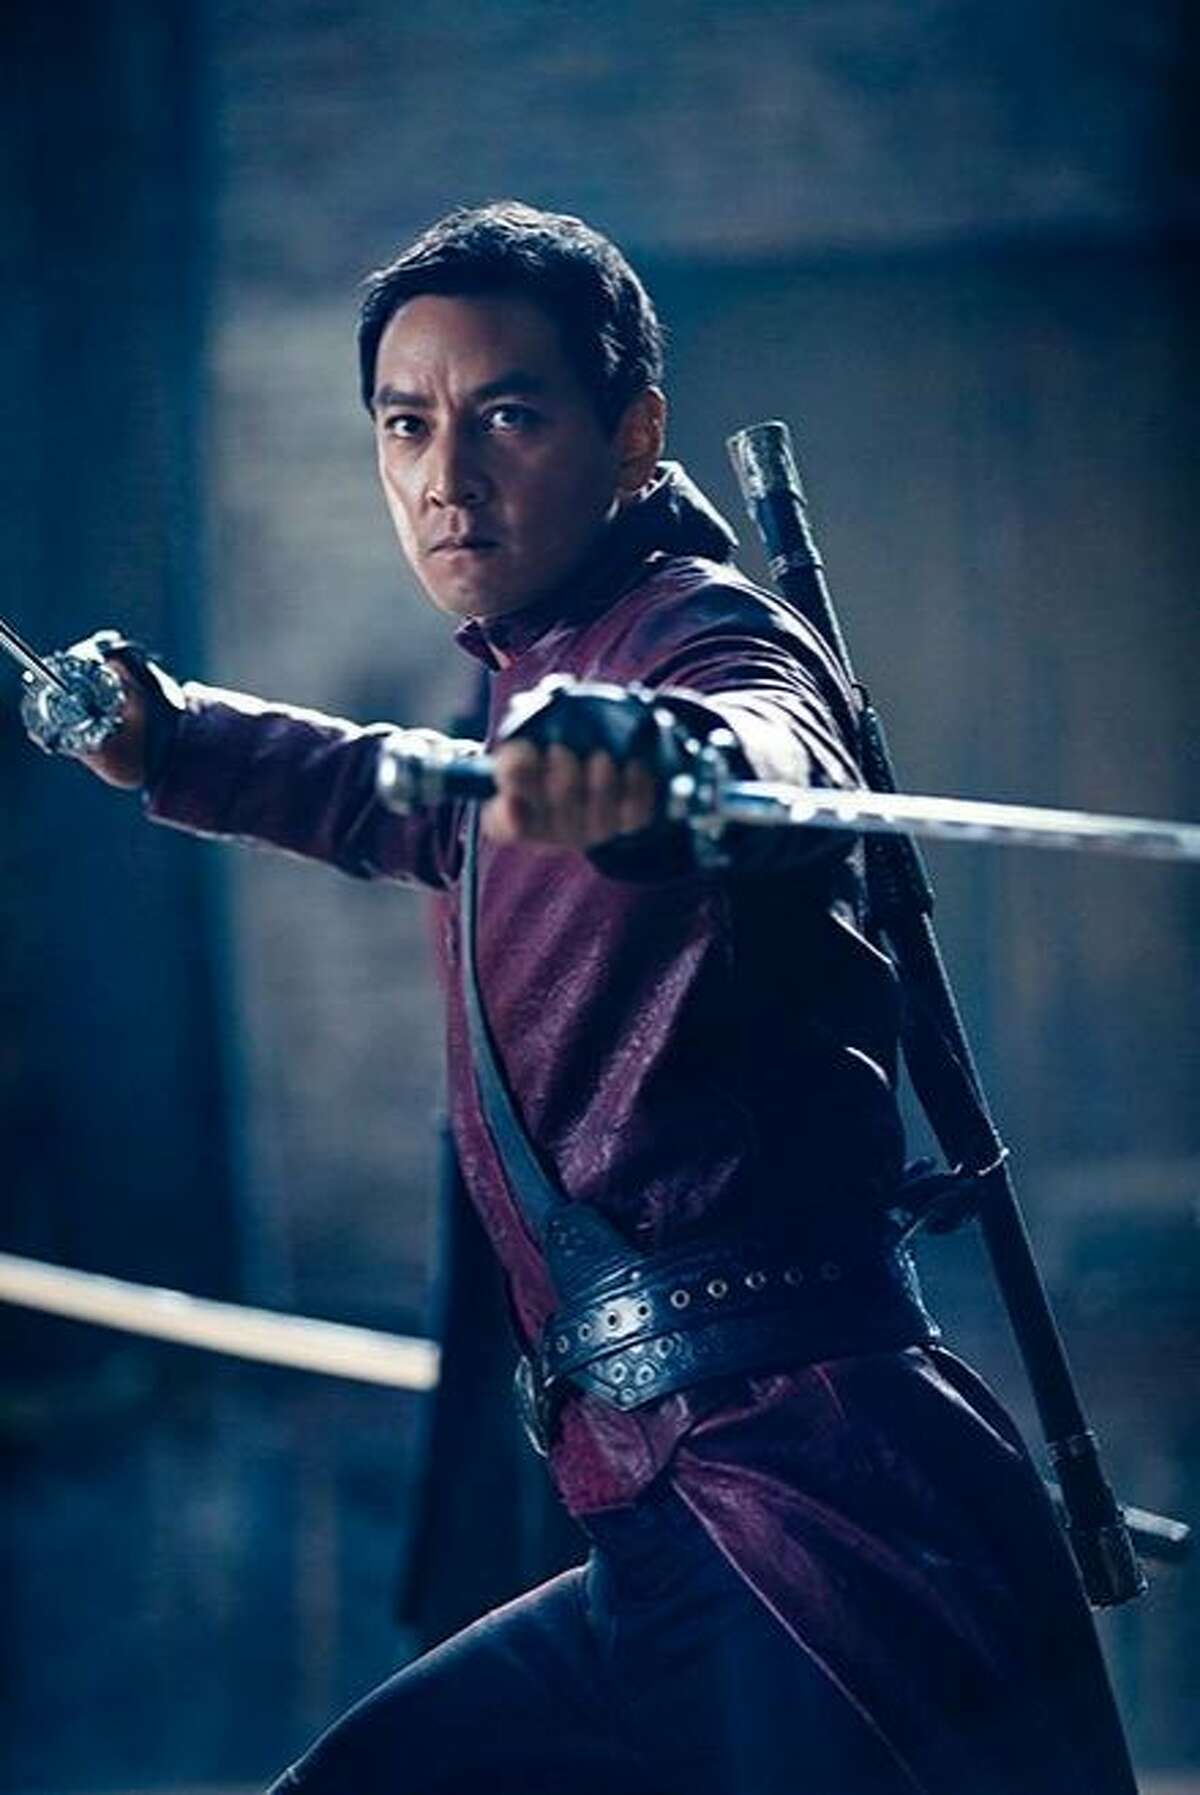 Daniel Wu stars as Sunny in Into the Badlands: A warrior and a young boy seek enlightenment in this martial arts-themed series debuting Nov. 15 on AMC